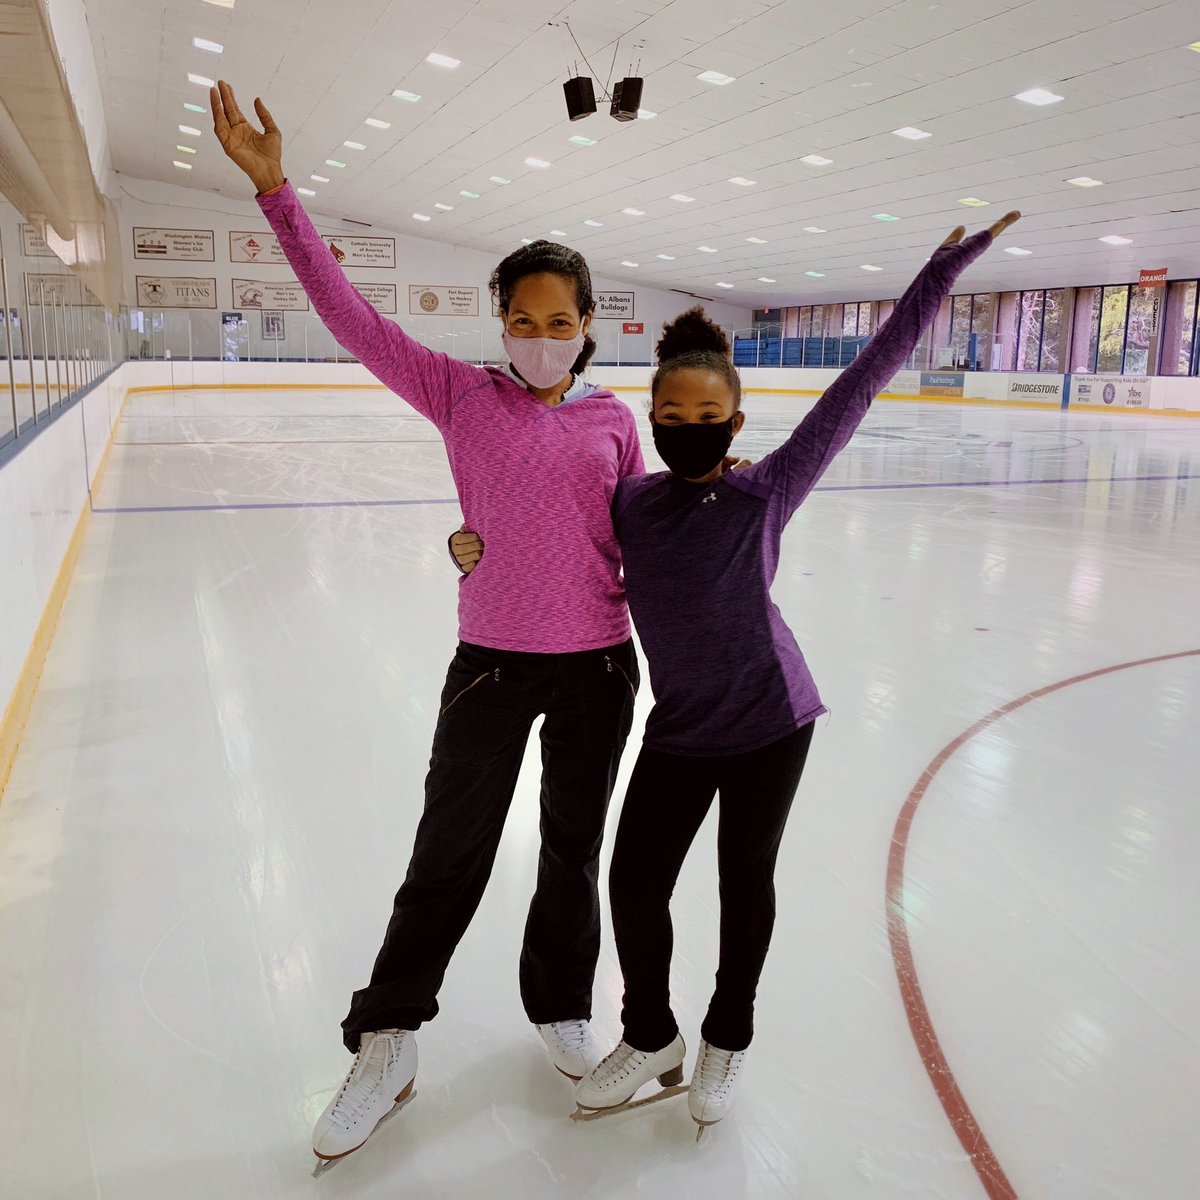 We’re officially open! 

Katrice and Kaitlynarrived bright and early and earned bragging rights as the very first skaters to kick off our season!

Beat the heat and join us for Public Skating July 1-3, 2021:
10:00-12:00pm
12:30-2:30pm
3:00-5:00pm
5:30-7:30pm
#staycooldc #dcsummer